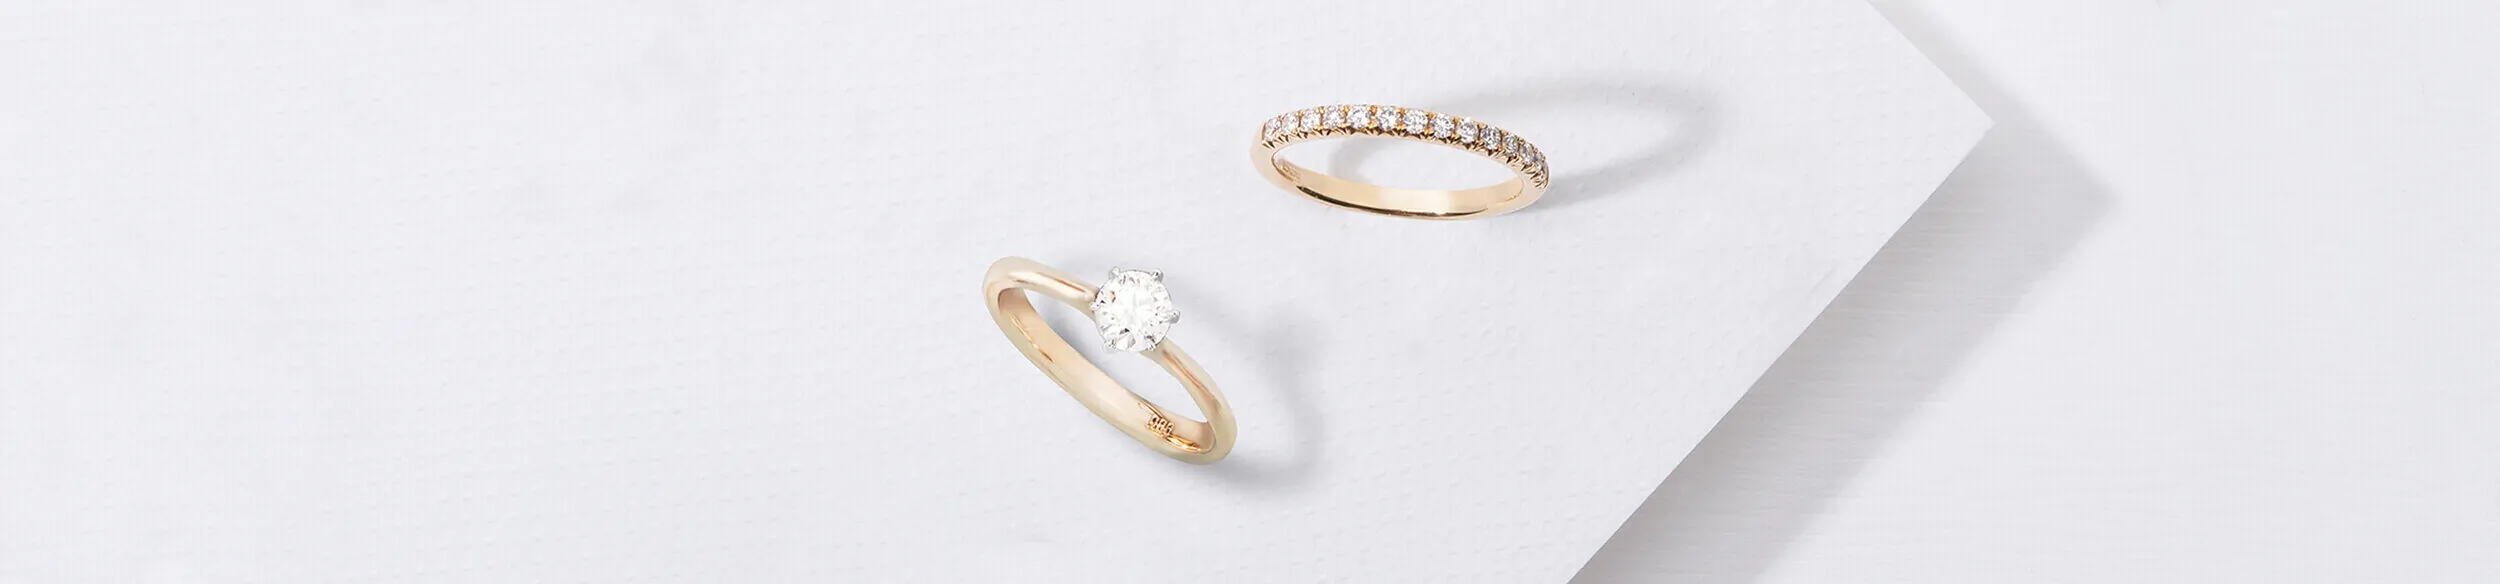 Choosing a Wedding Band for your Engagement Ring